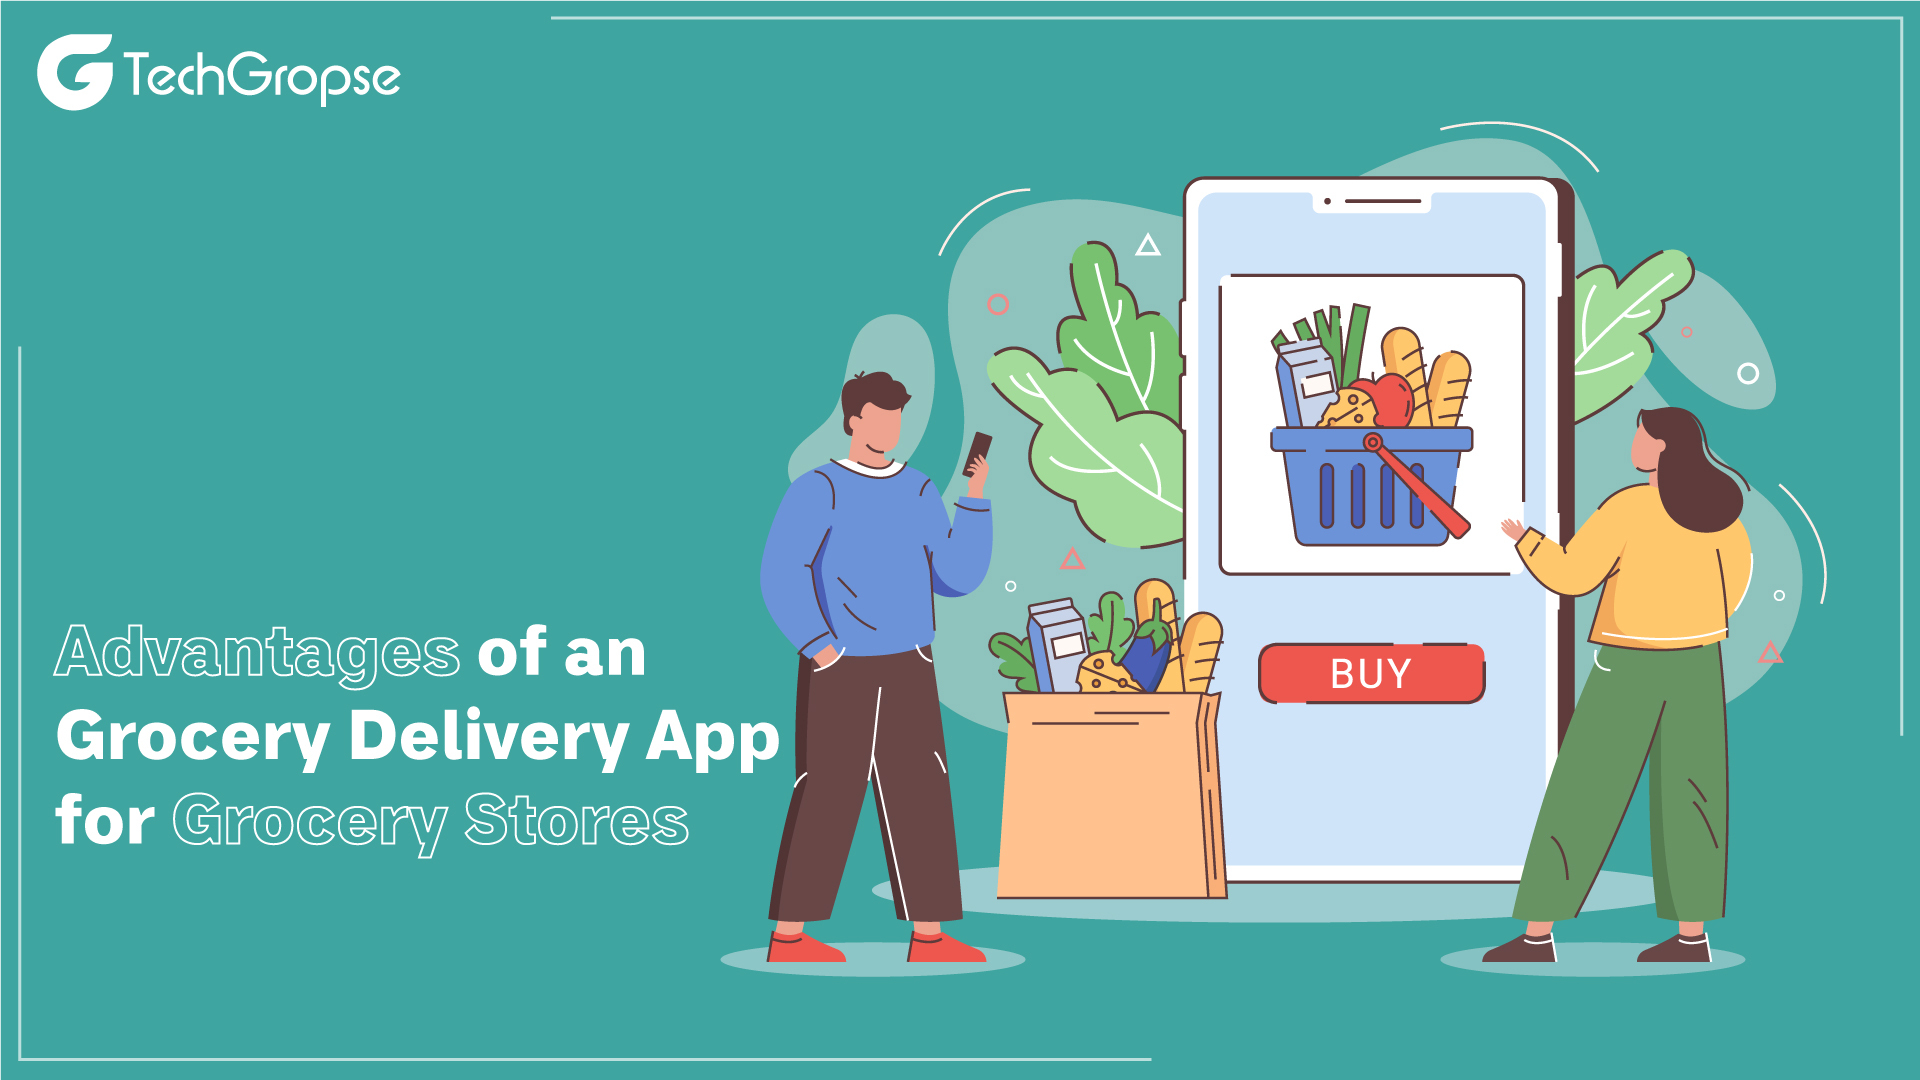 Advantages of an On-Demand Grocery Delivery App for Grocery Stores